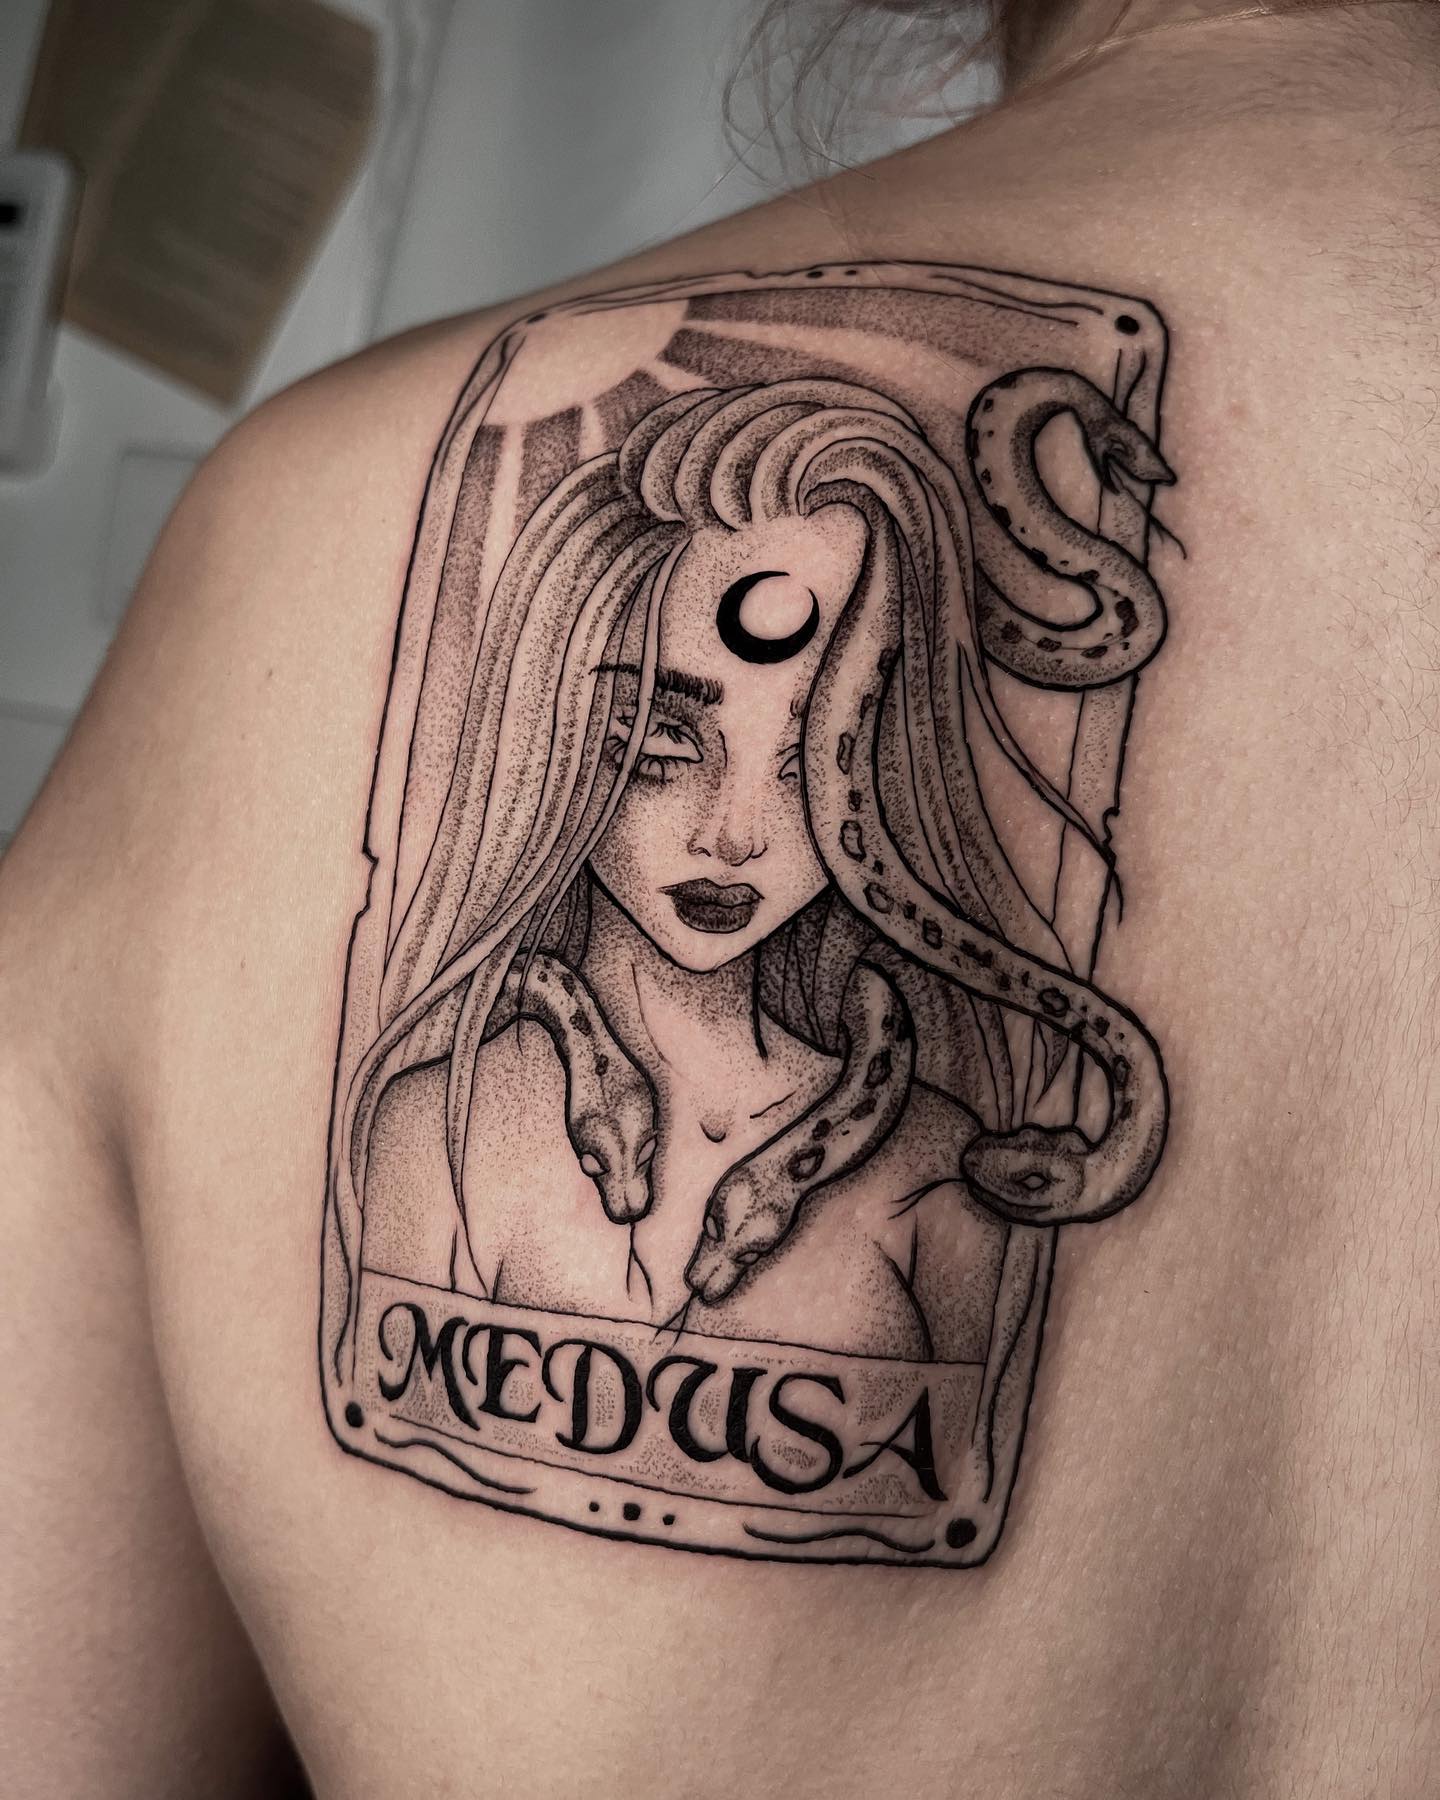 Tarot cards symbolize different meanings according to who is shown in the frame. In this creative tattoo, Medusa is placed in it. It's a wonderful one since Medusa is a archetypal femme fatale. Death, erotic desire and violence are one of its meanings.